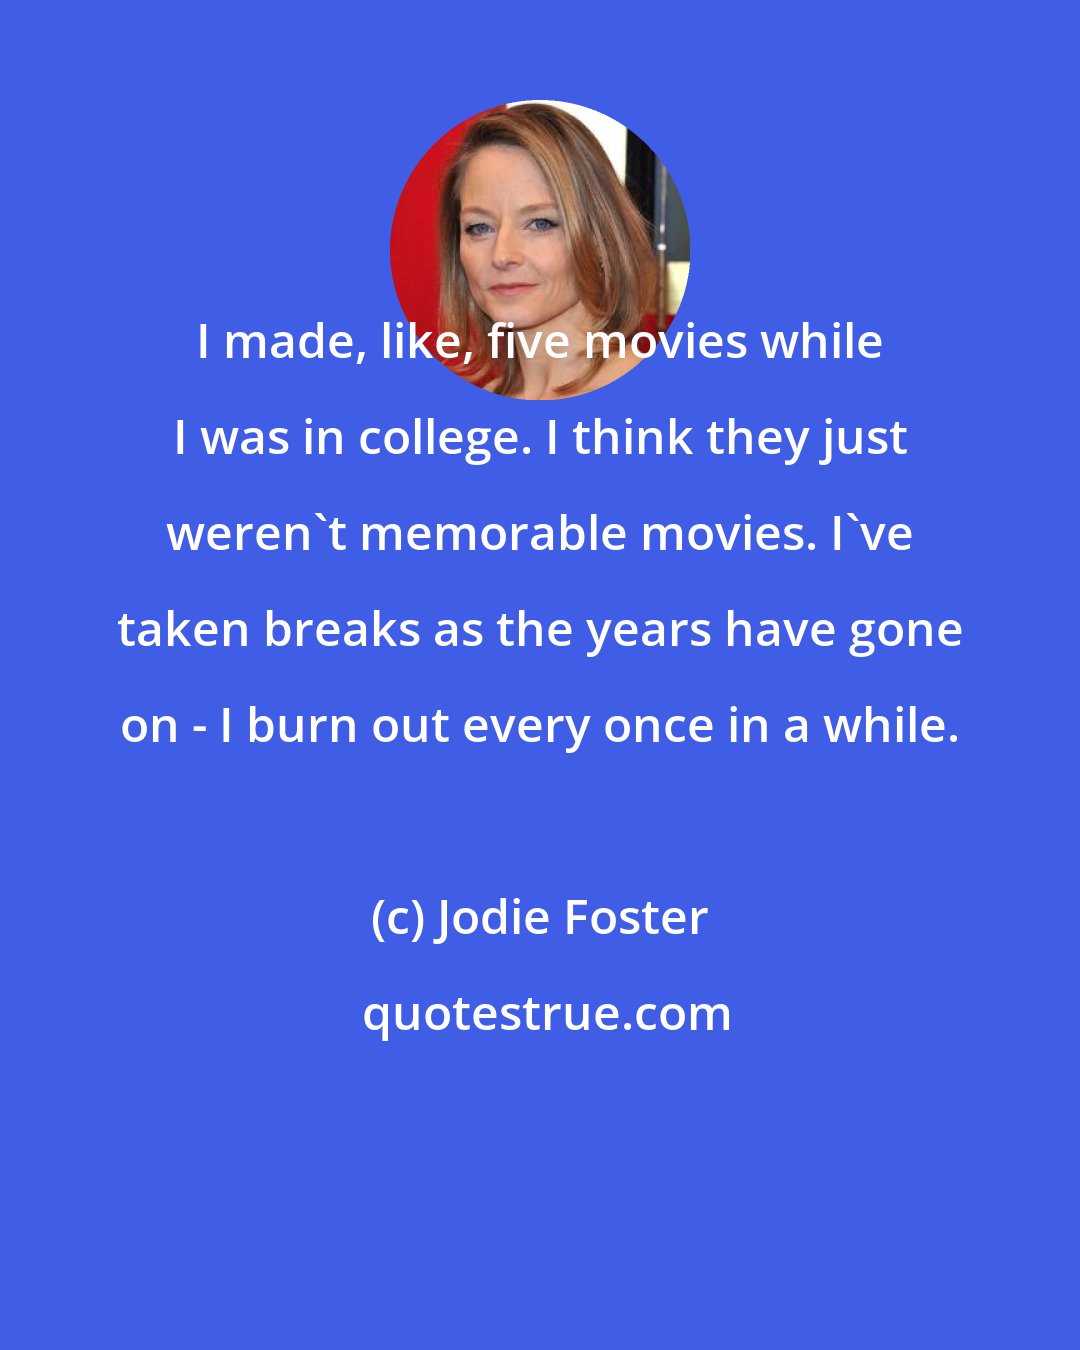 Jodie Foster: I made, like, five movies while I was in college. I think they just weren't memorable movies. I've taken breaks as the years have gone on - I burn out every once in a while.